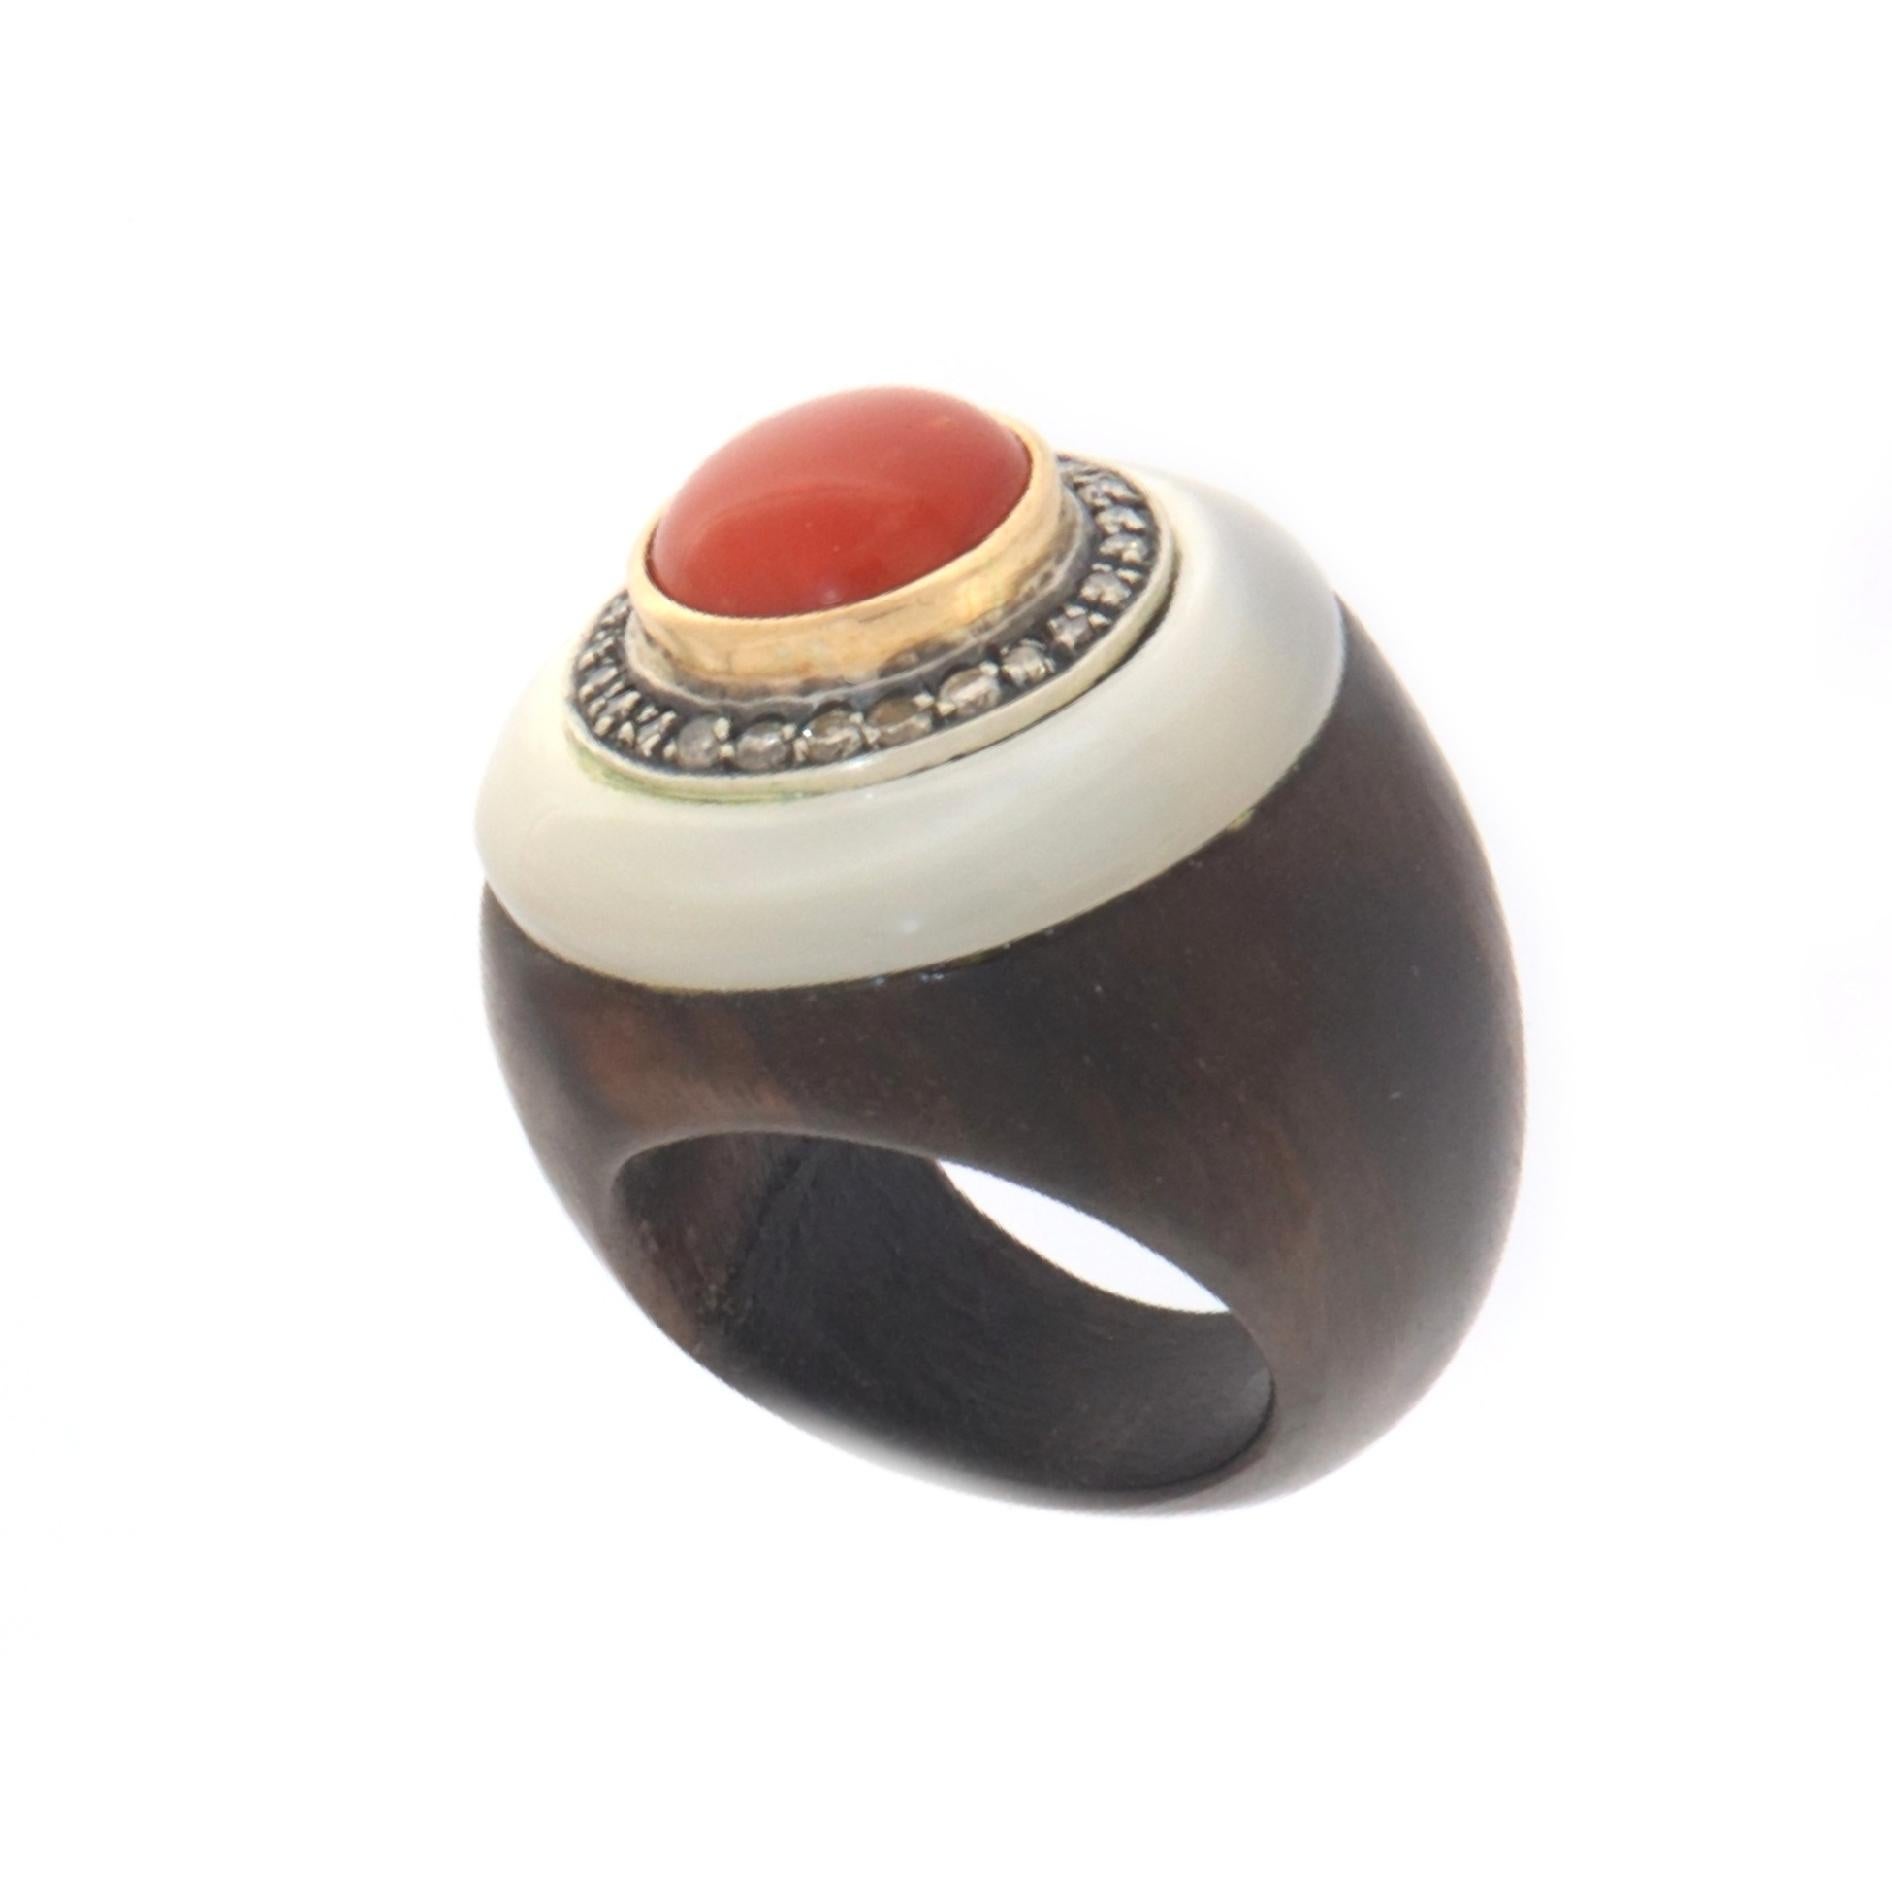 The stem of this particular ring was made entirely of wood, in the upper part a circular mother-of-pearl was applied which supports a small silver circle where diamonds are set which in turn support a natural red coral button surrounded by yellow